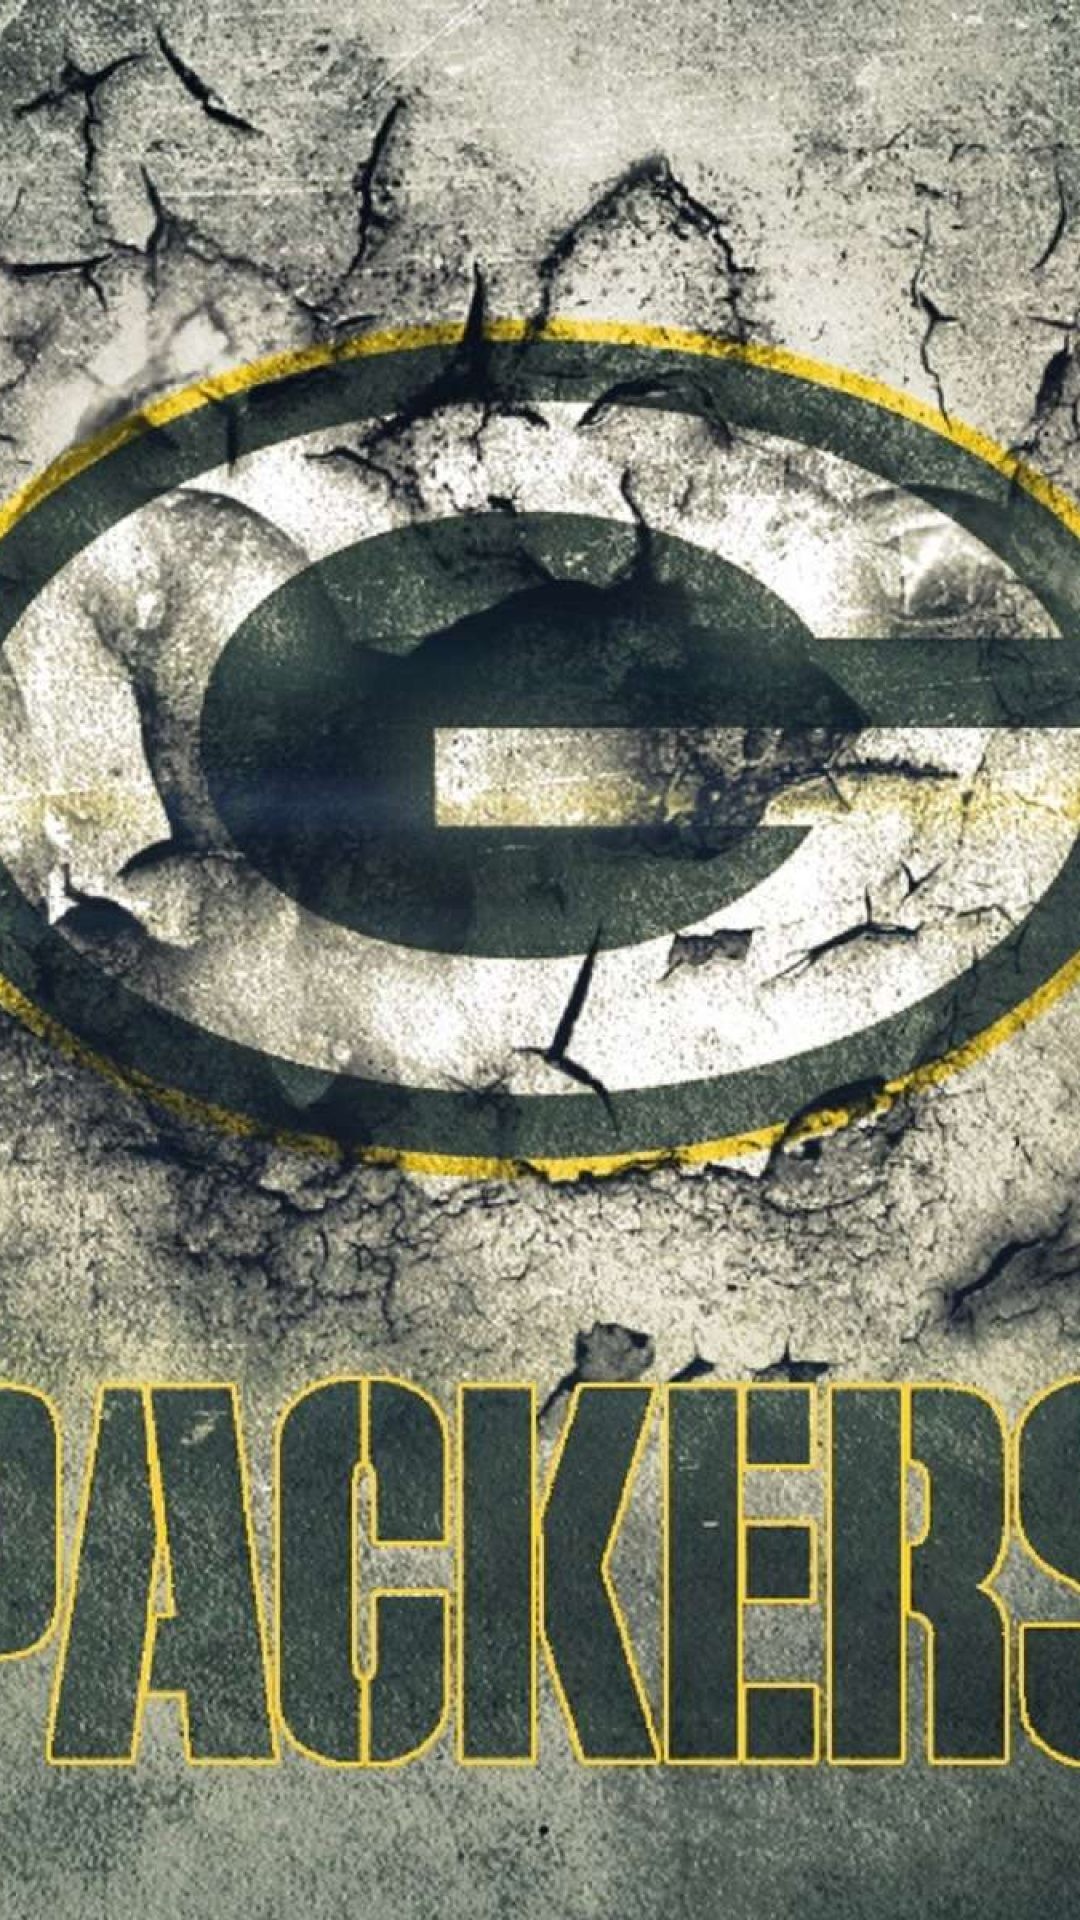 Green Bay Packers Wallpapers  Top Free Green Bay Packers Backgrounds   WallpaperAccess